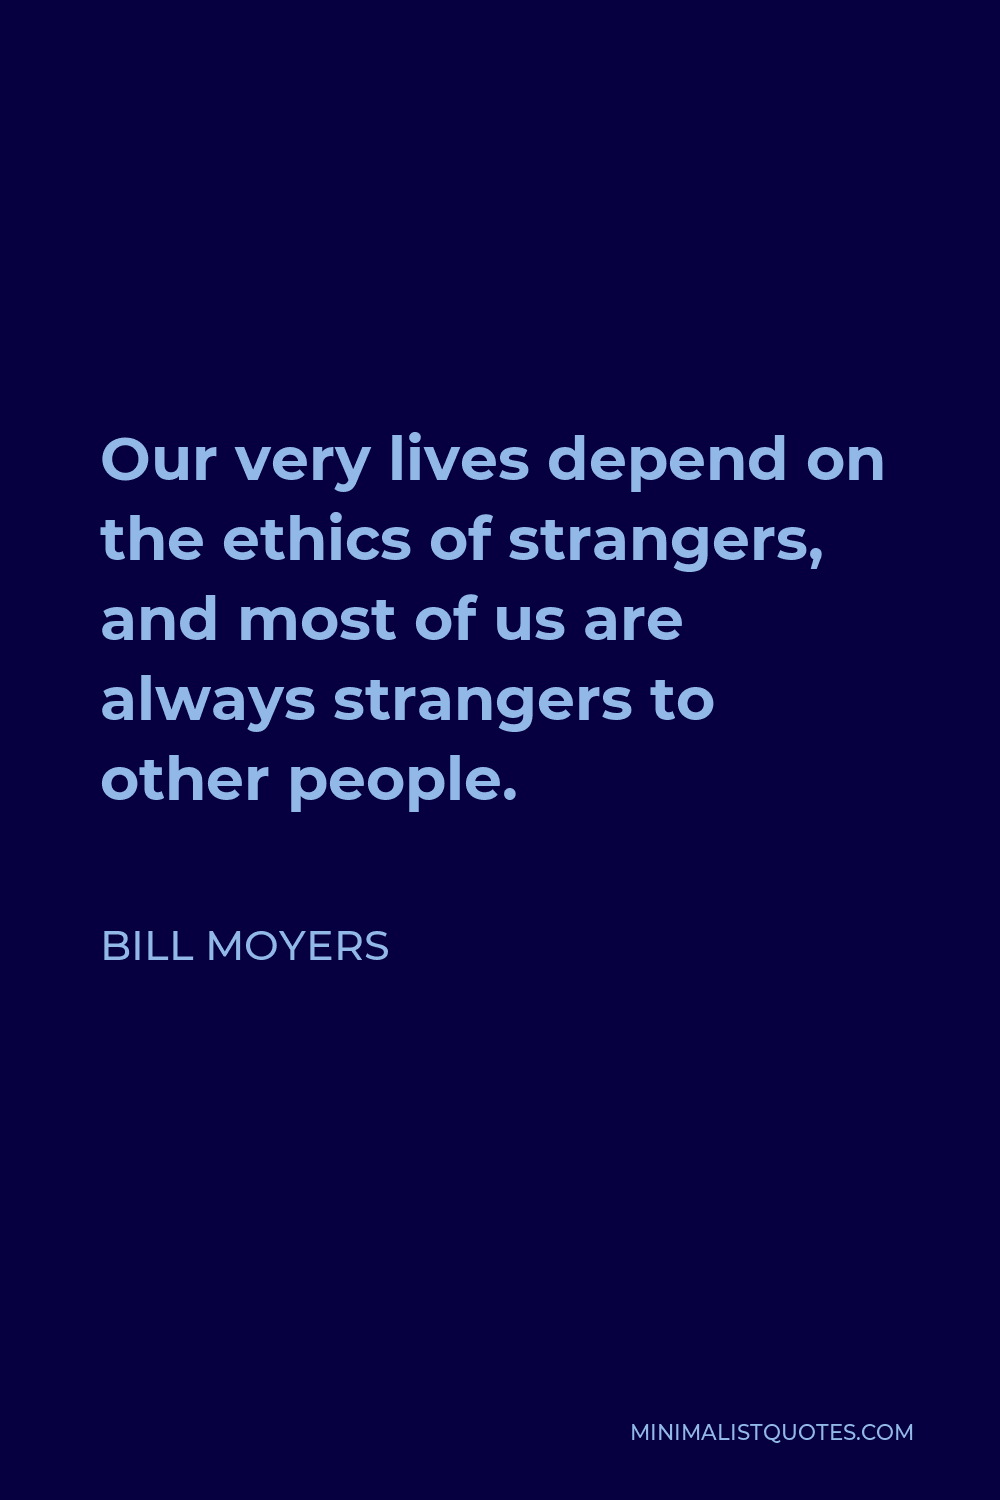 Bill Moyers Quote - Our very lives depend on the ethics of strangers, and most of us are always strangers to other people.